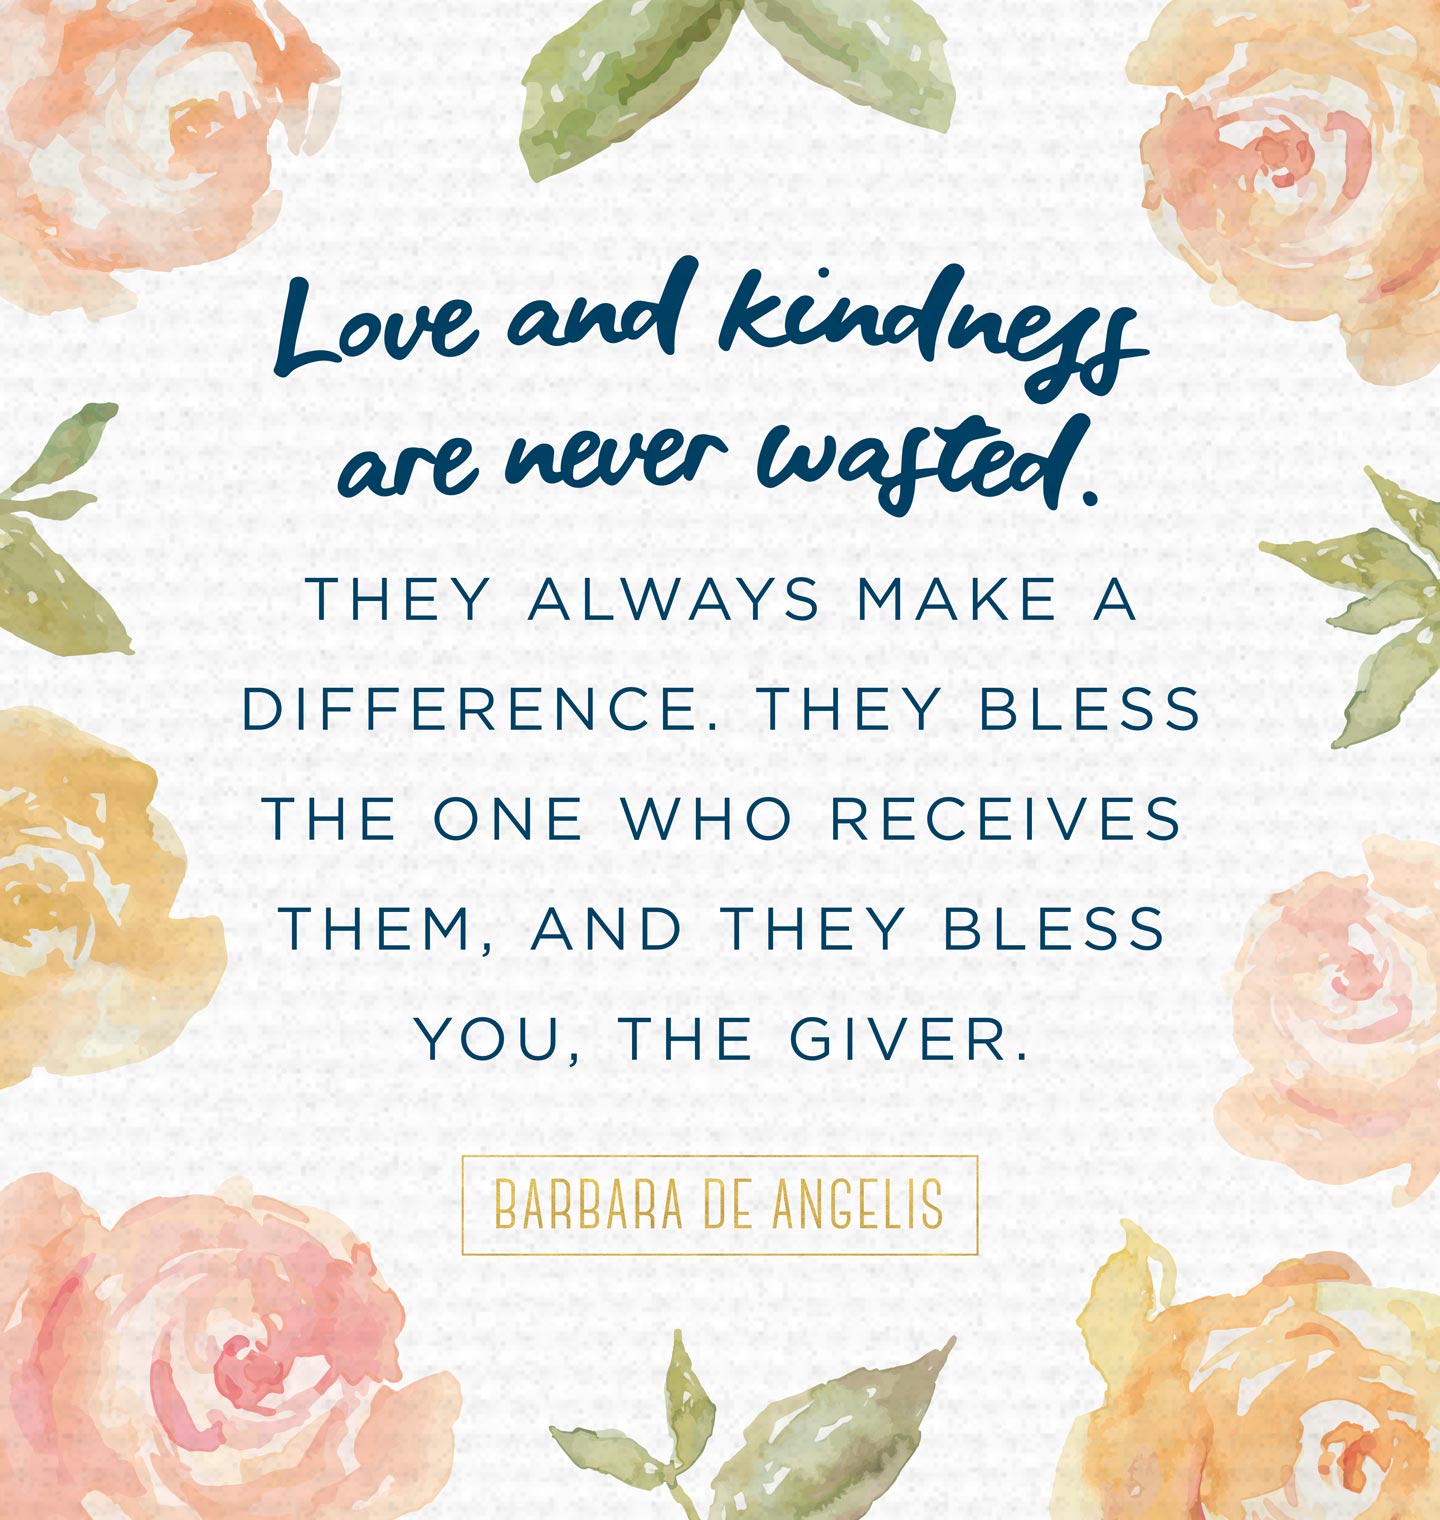 love and kindness are never wasted they always make a difference. they bless the one who receives them, and they bless you the giver. barbara de angels